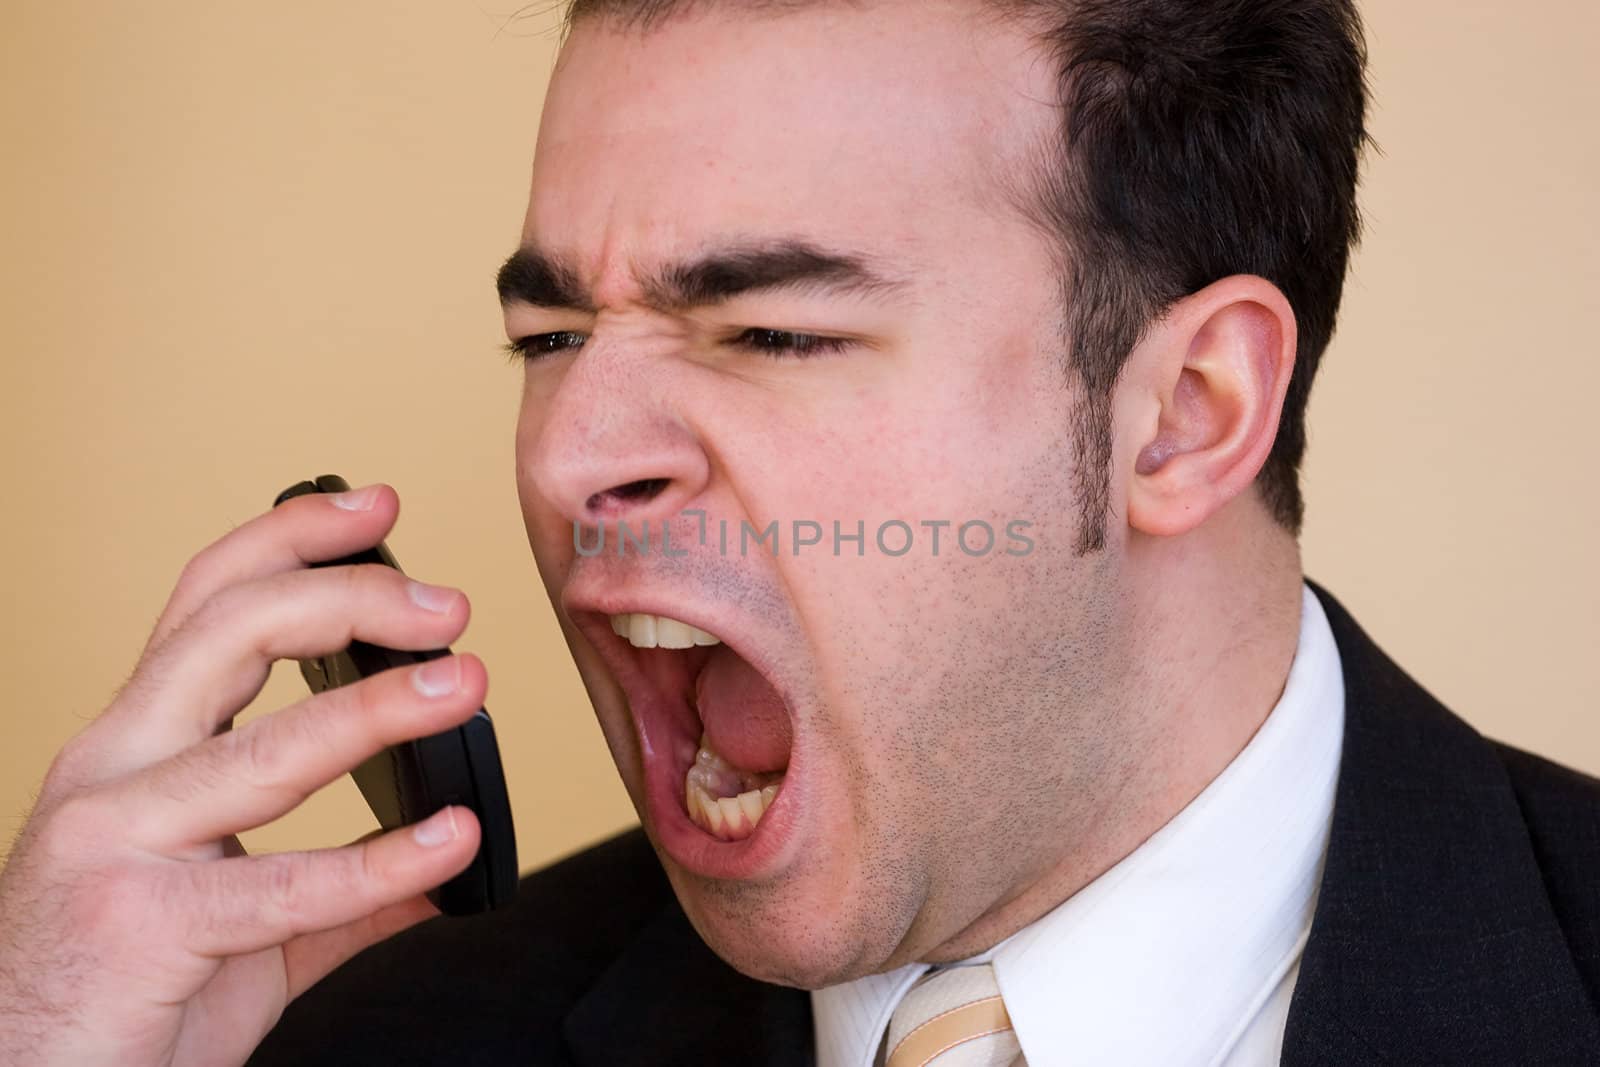 A business man is furiously screaming into his cell phone.